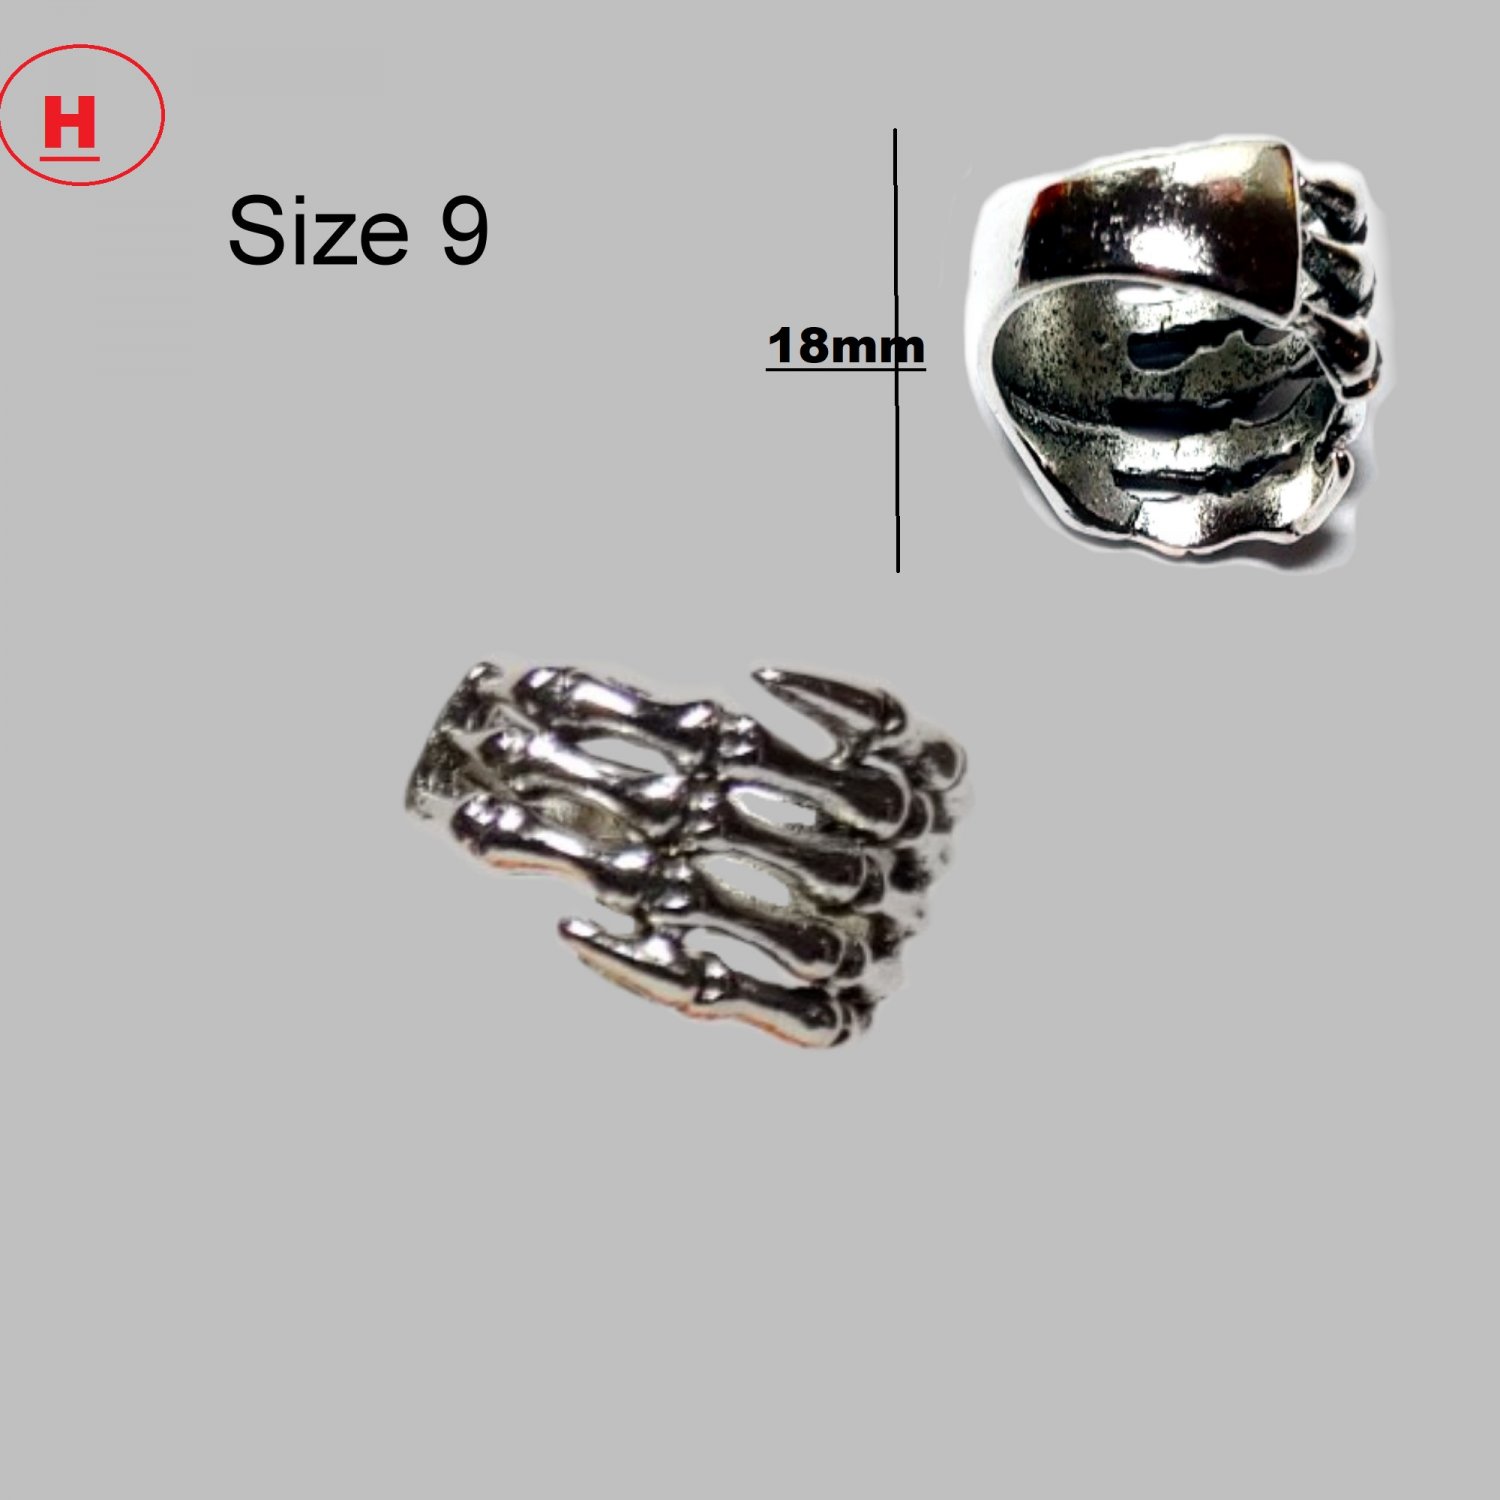 Skelton Hand ring Stainless Steel Size 9